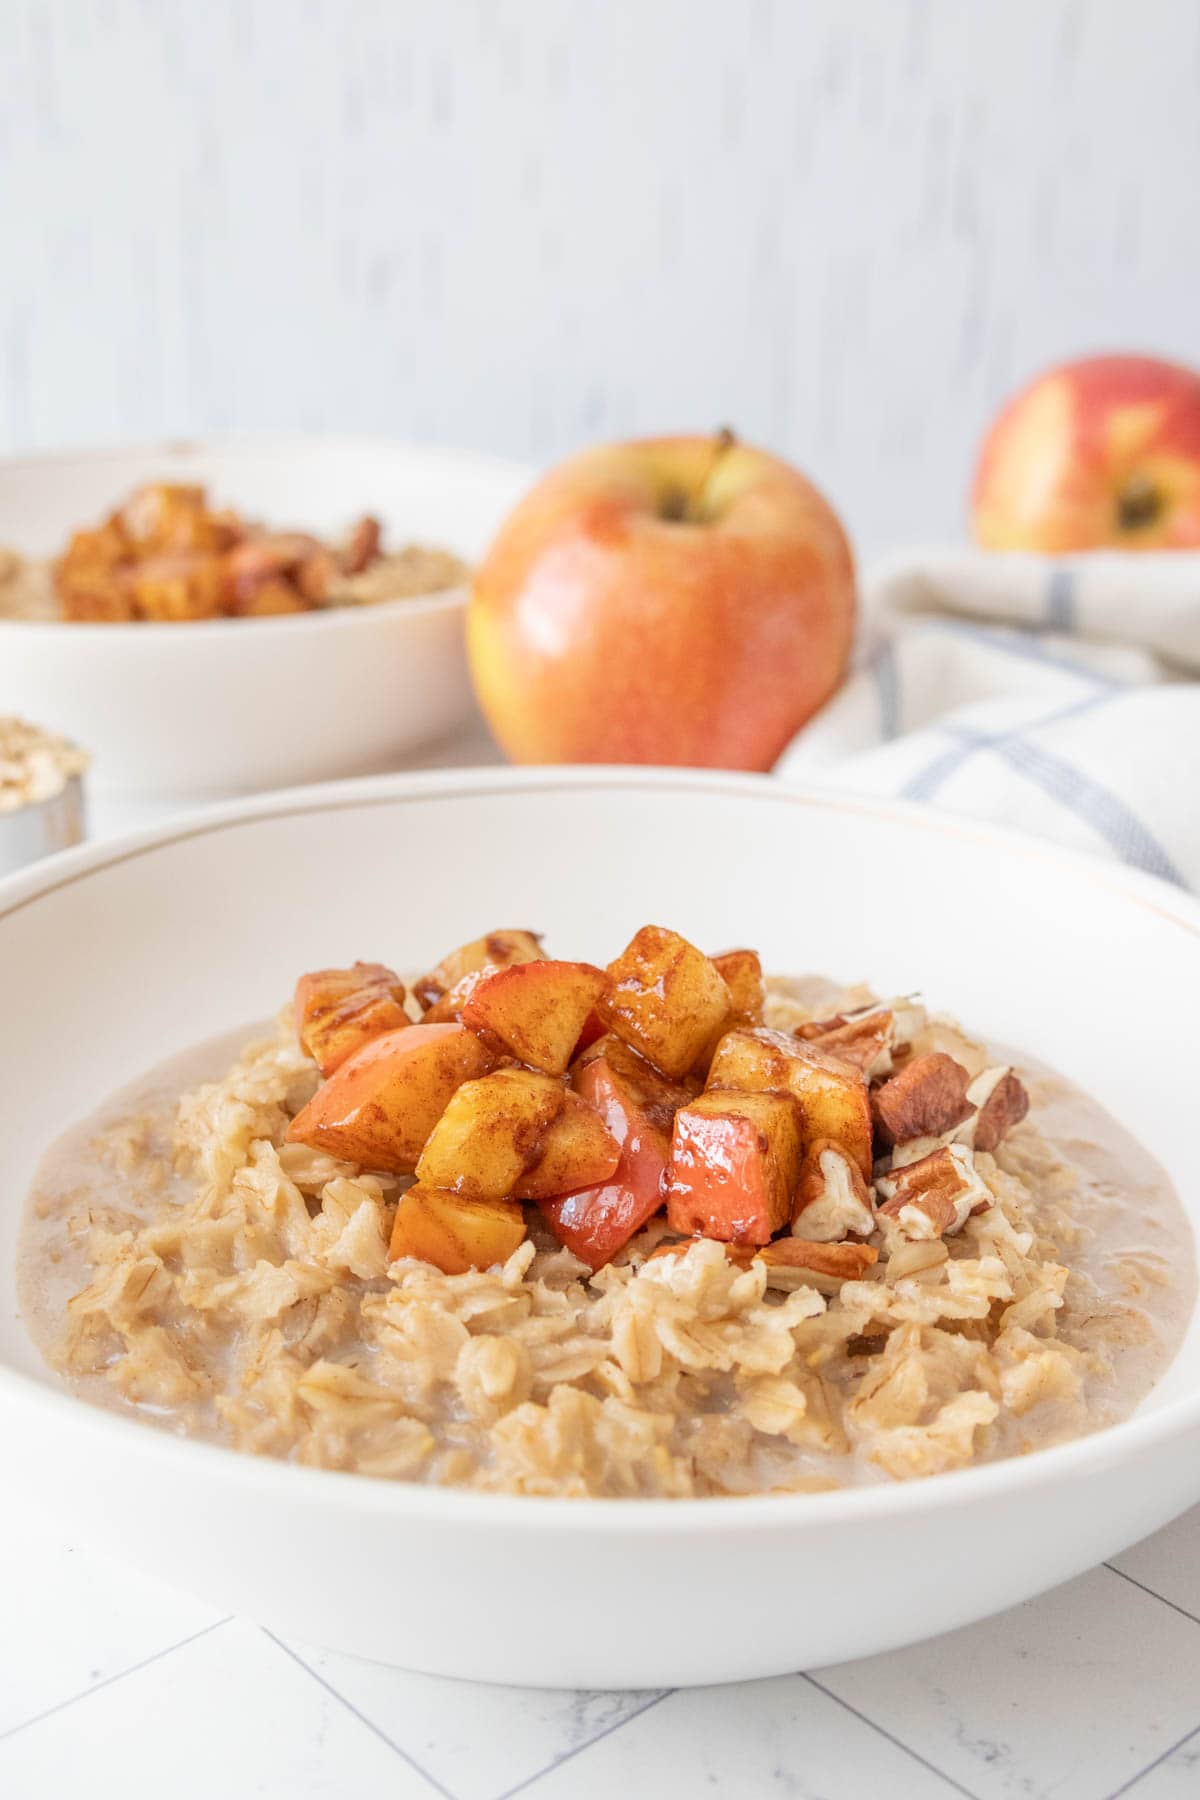 A bowl of oatmeal with apples and nuts.